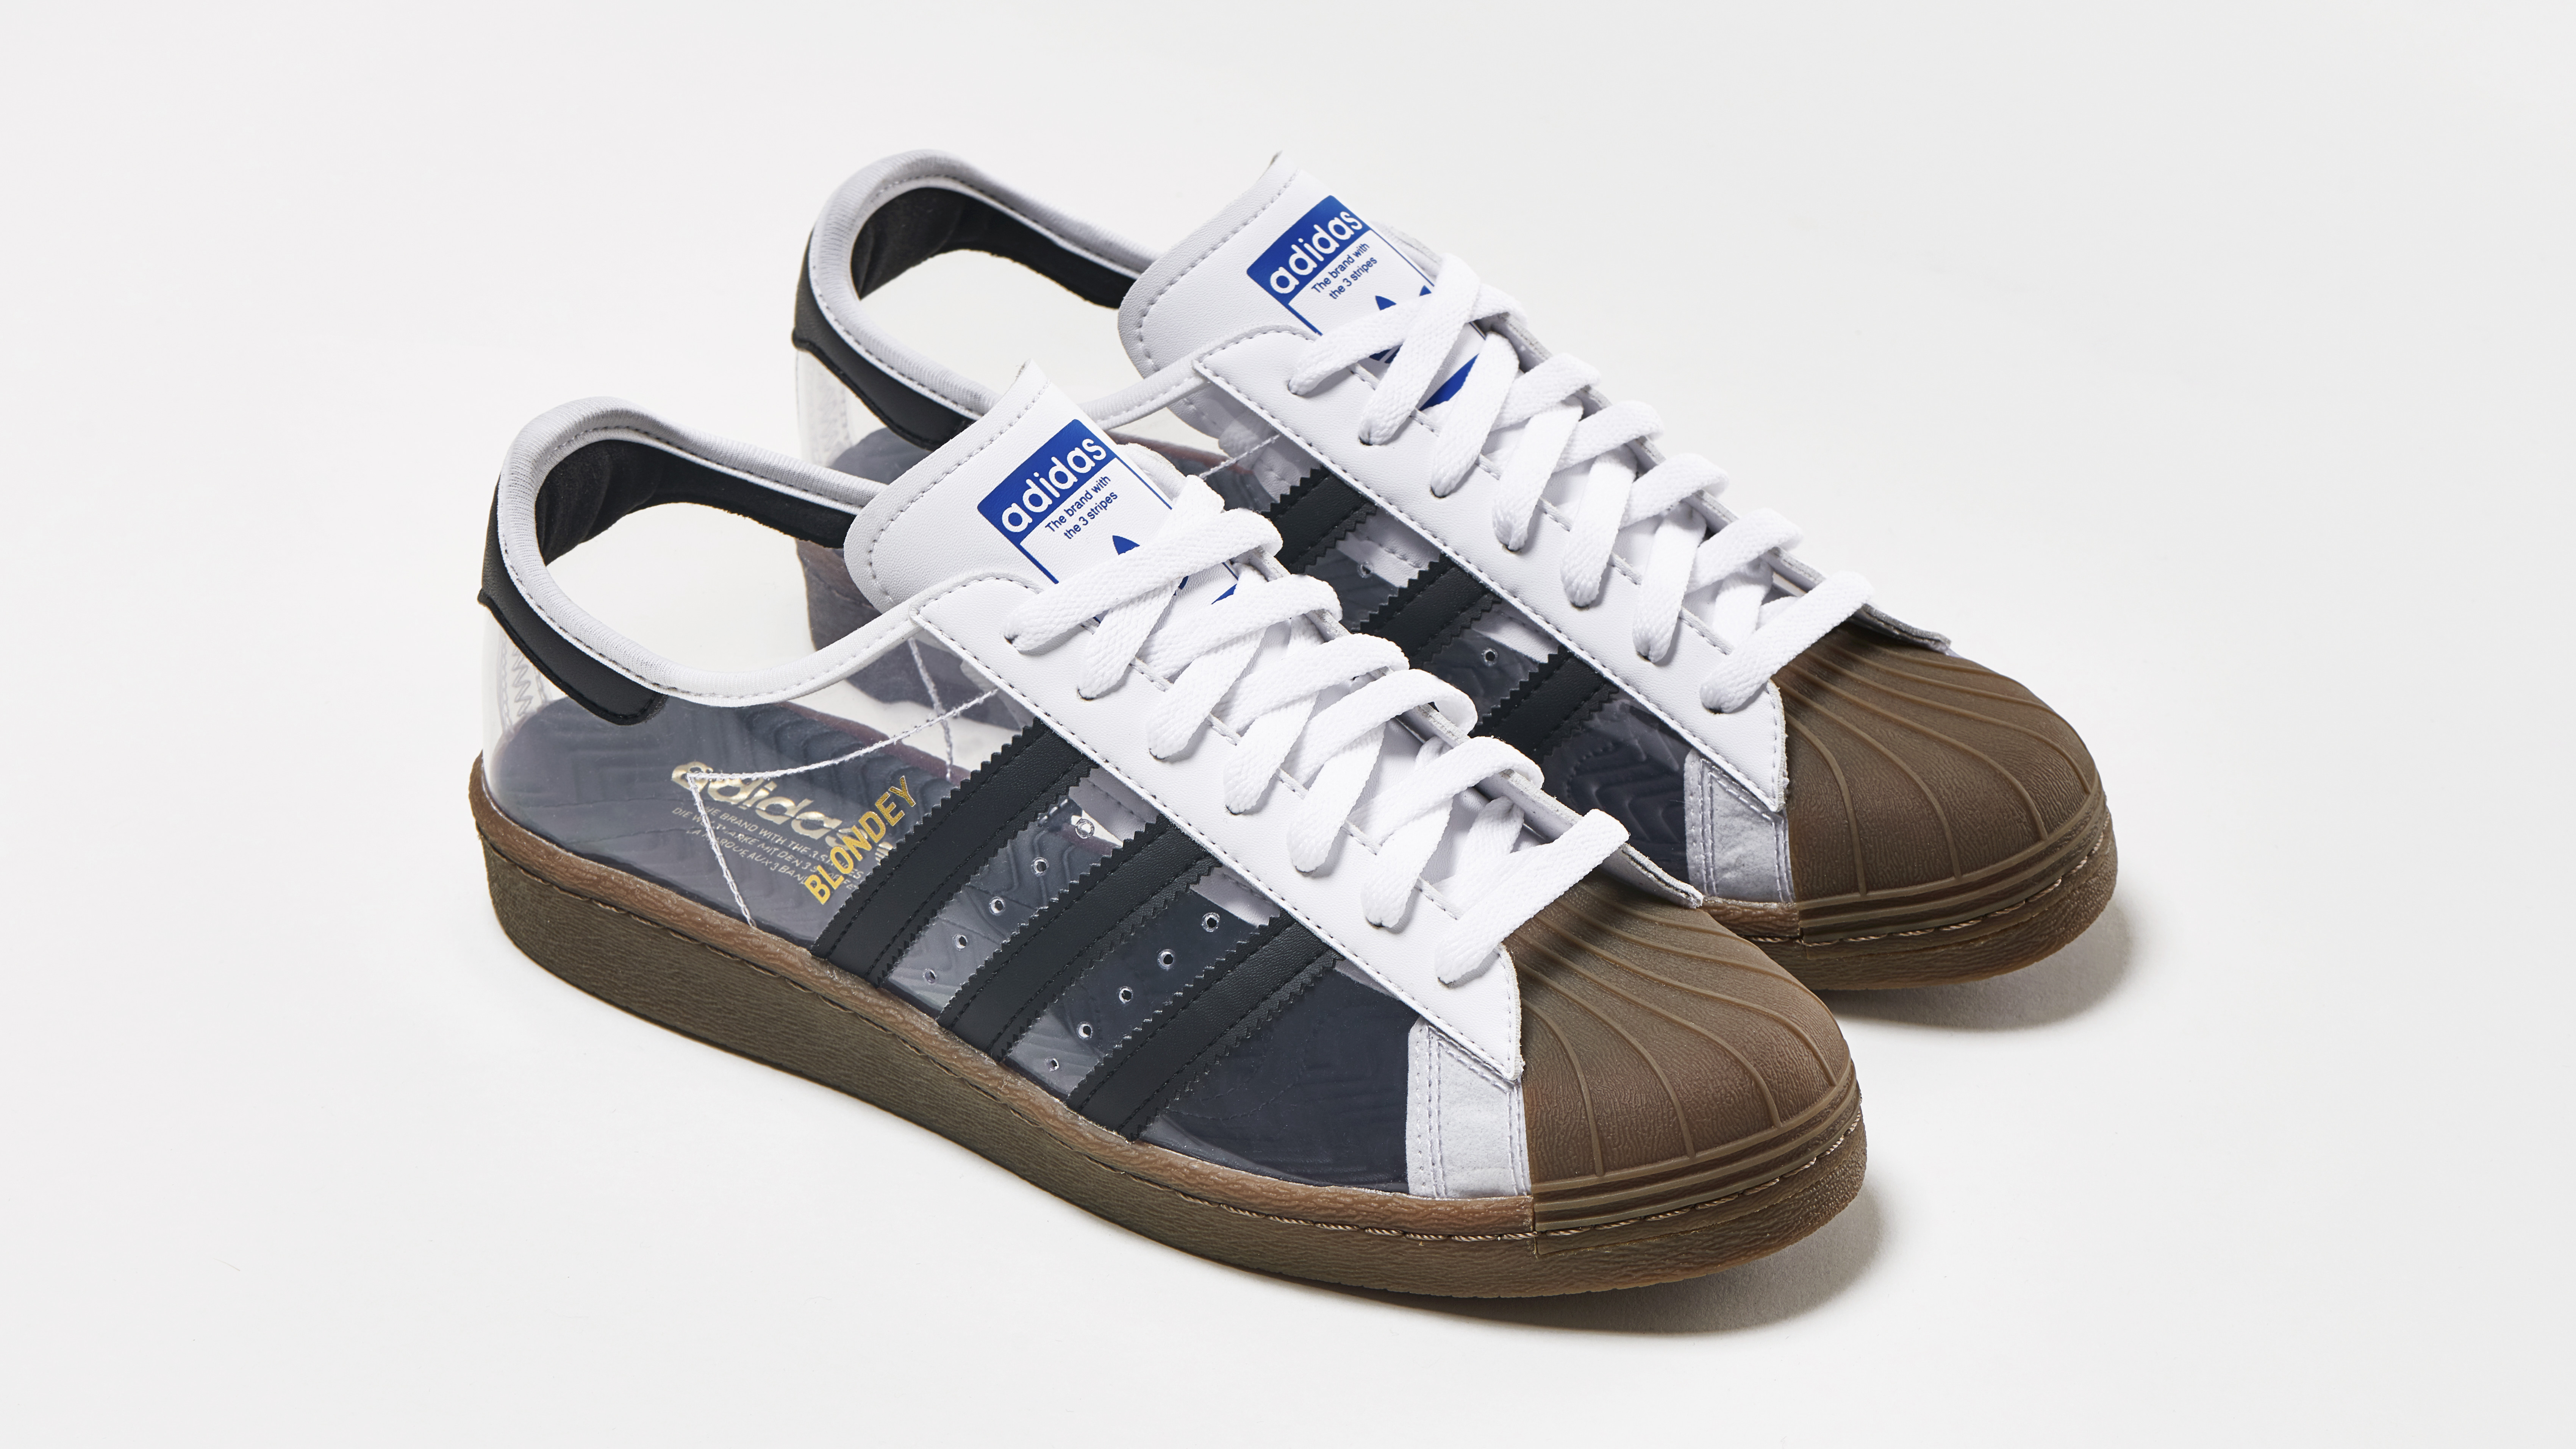 Blondey McCoy's Adidas Superstar Collab Features a Translucent 